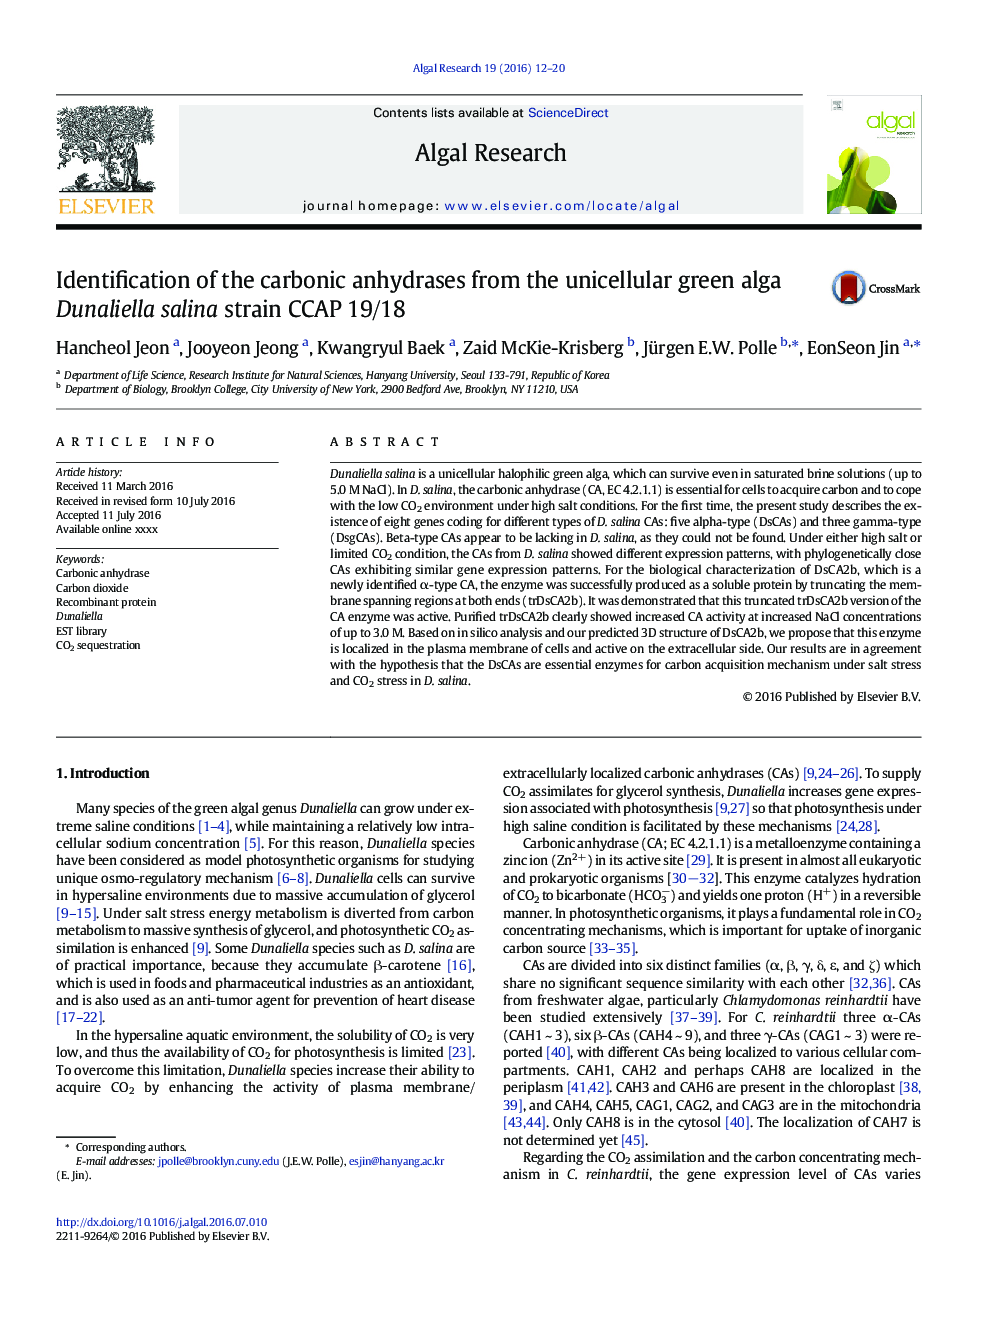 Identification of the carbonic anhydrases from the unicellular green alga Dunaliella salina strain CCAP 19/18